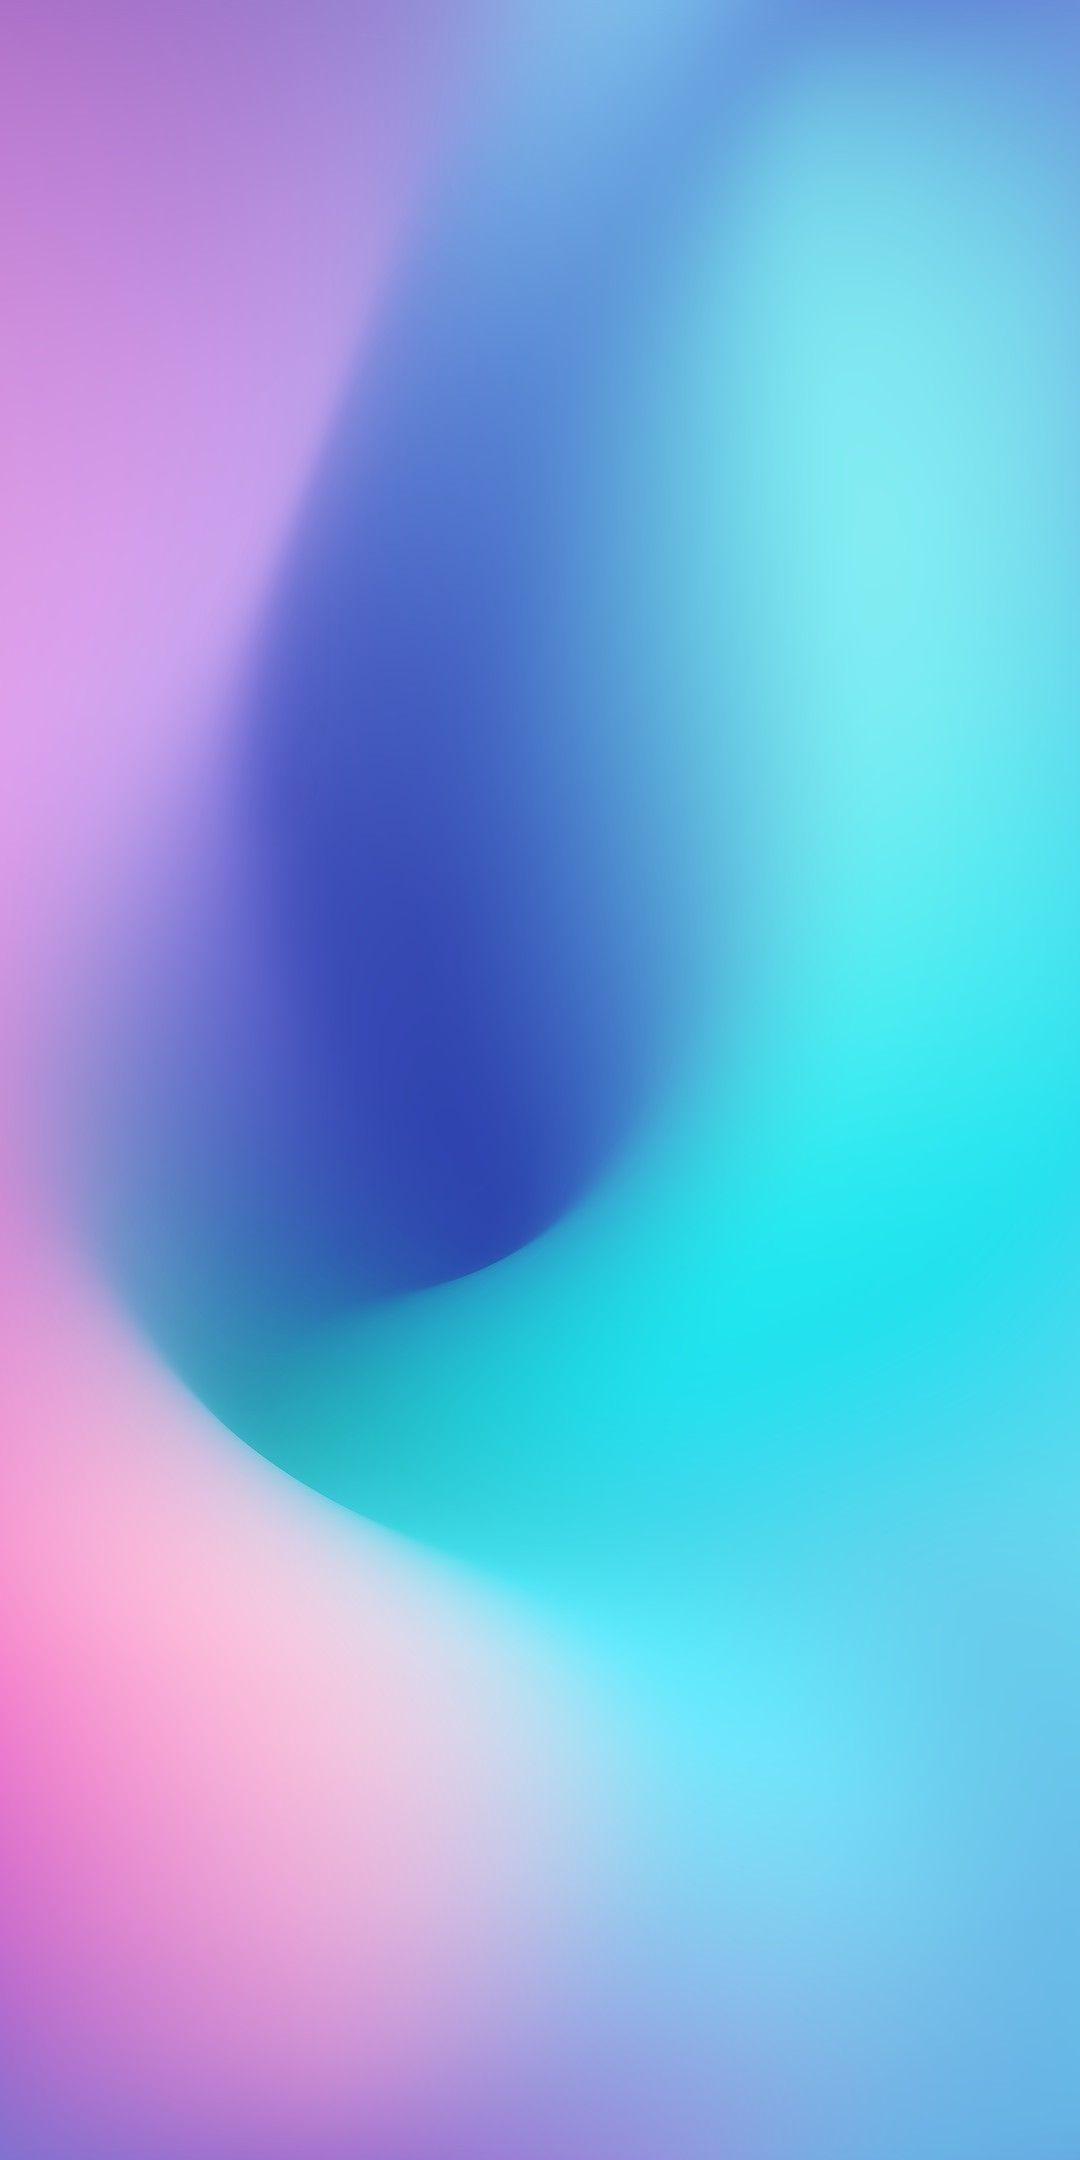 Galaxy A6s. Abstract °Amoled °Liquid °Gradient. Colorful